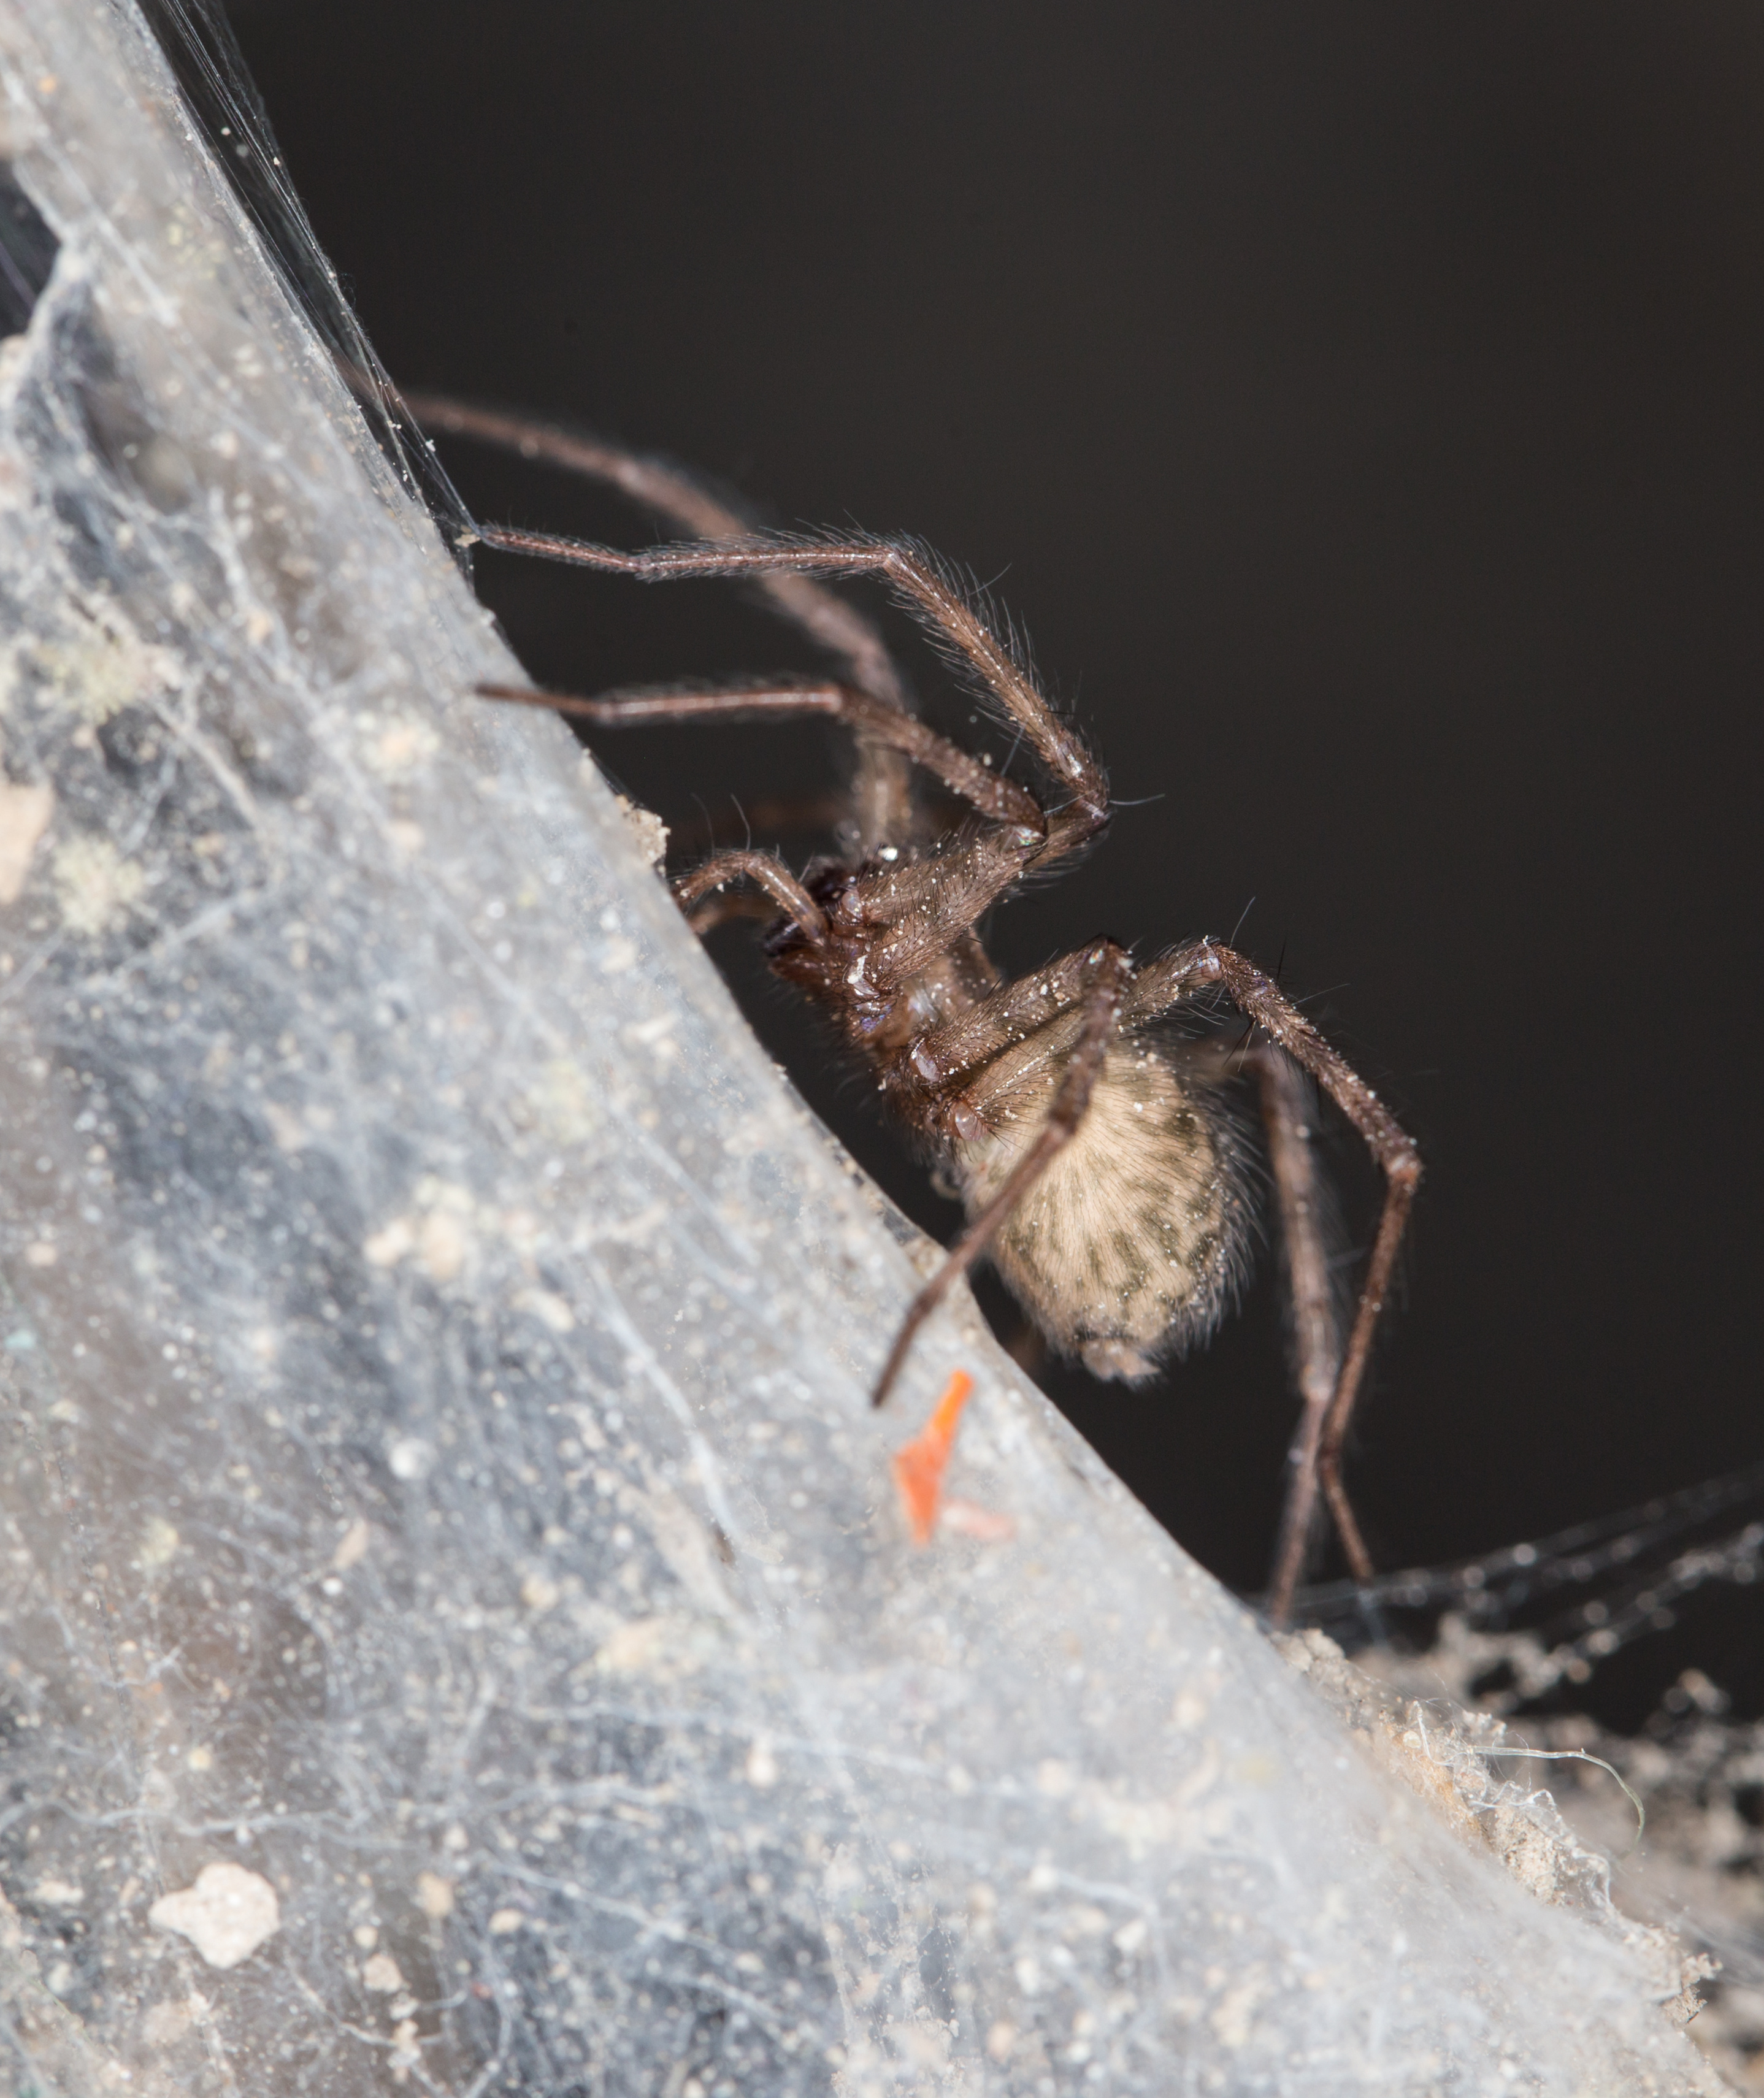 A spider crawling up a web - call Thorn Pest Solutions to remove spiders in your home!